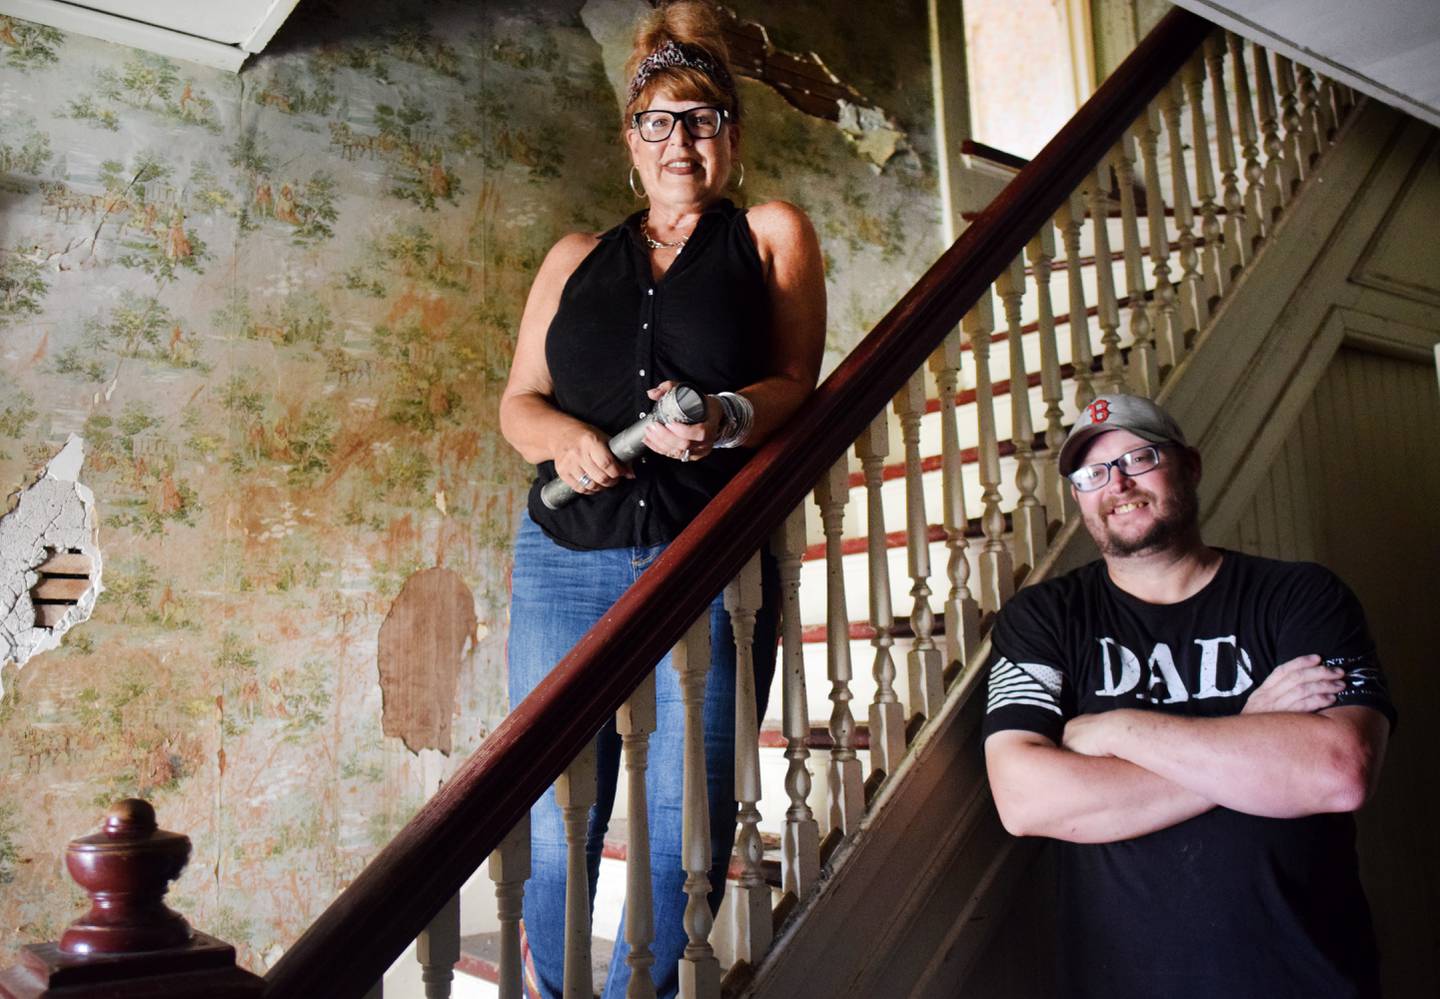 Nancy Sorbella of Carmel, N.Y., and Roger Seiser of Newton stand by the stairwell of a 112-year-old property at 427 N. Third Ave. E. in Newton. Sorbella says she has become obsessed with the home, which belonged to her family at one point, and she wants to restore it back to life.